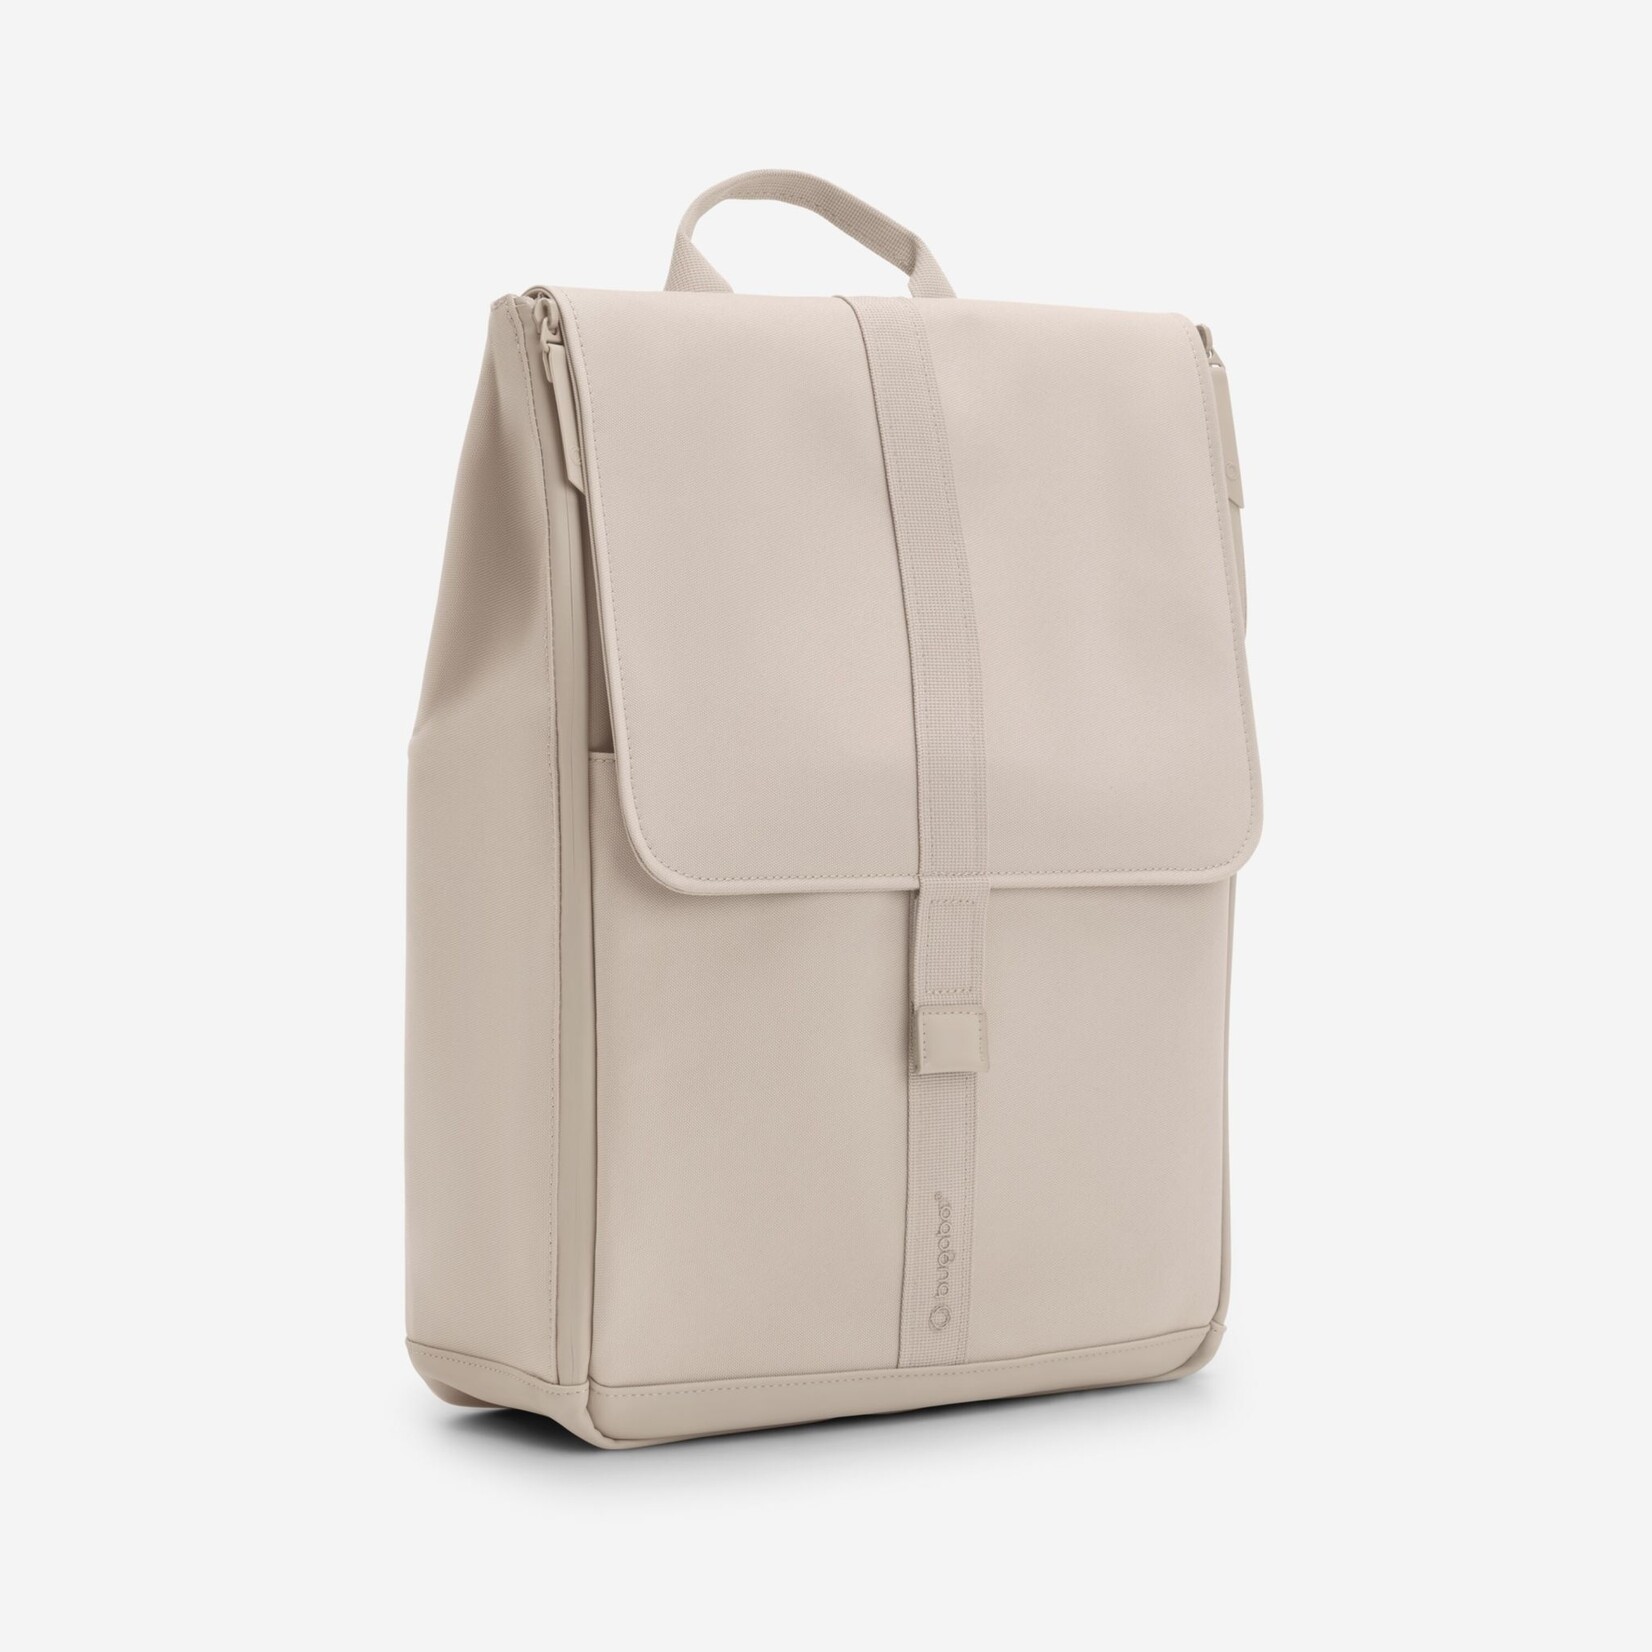 Bugaboo changing backpack-Desert Taupe